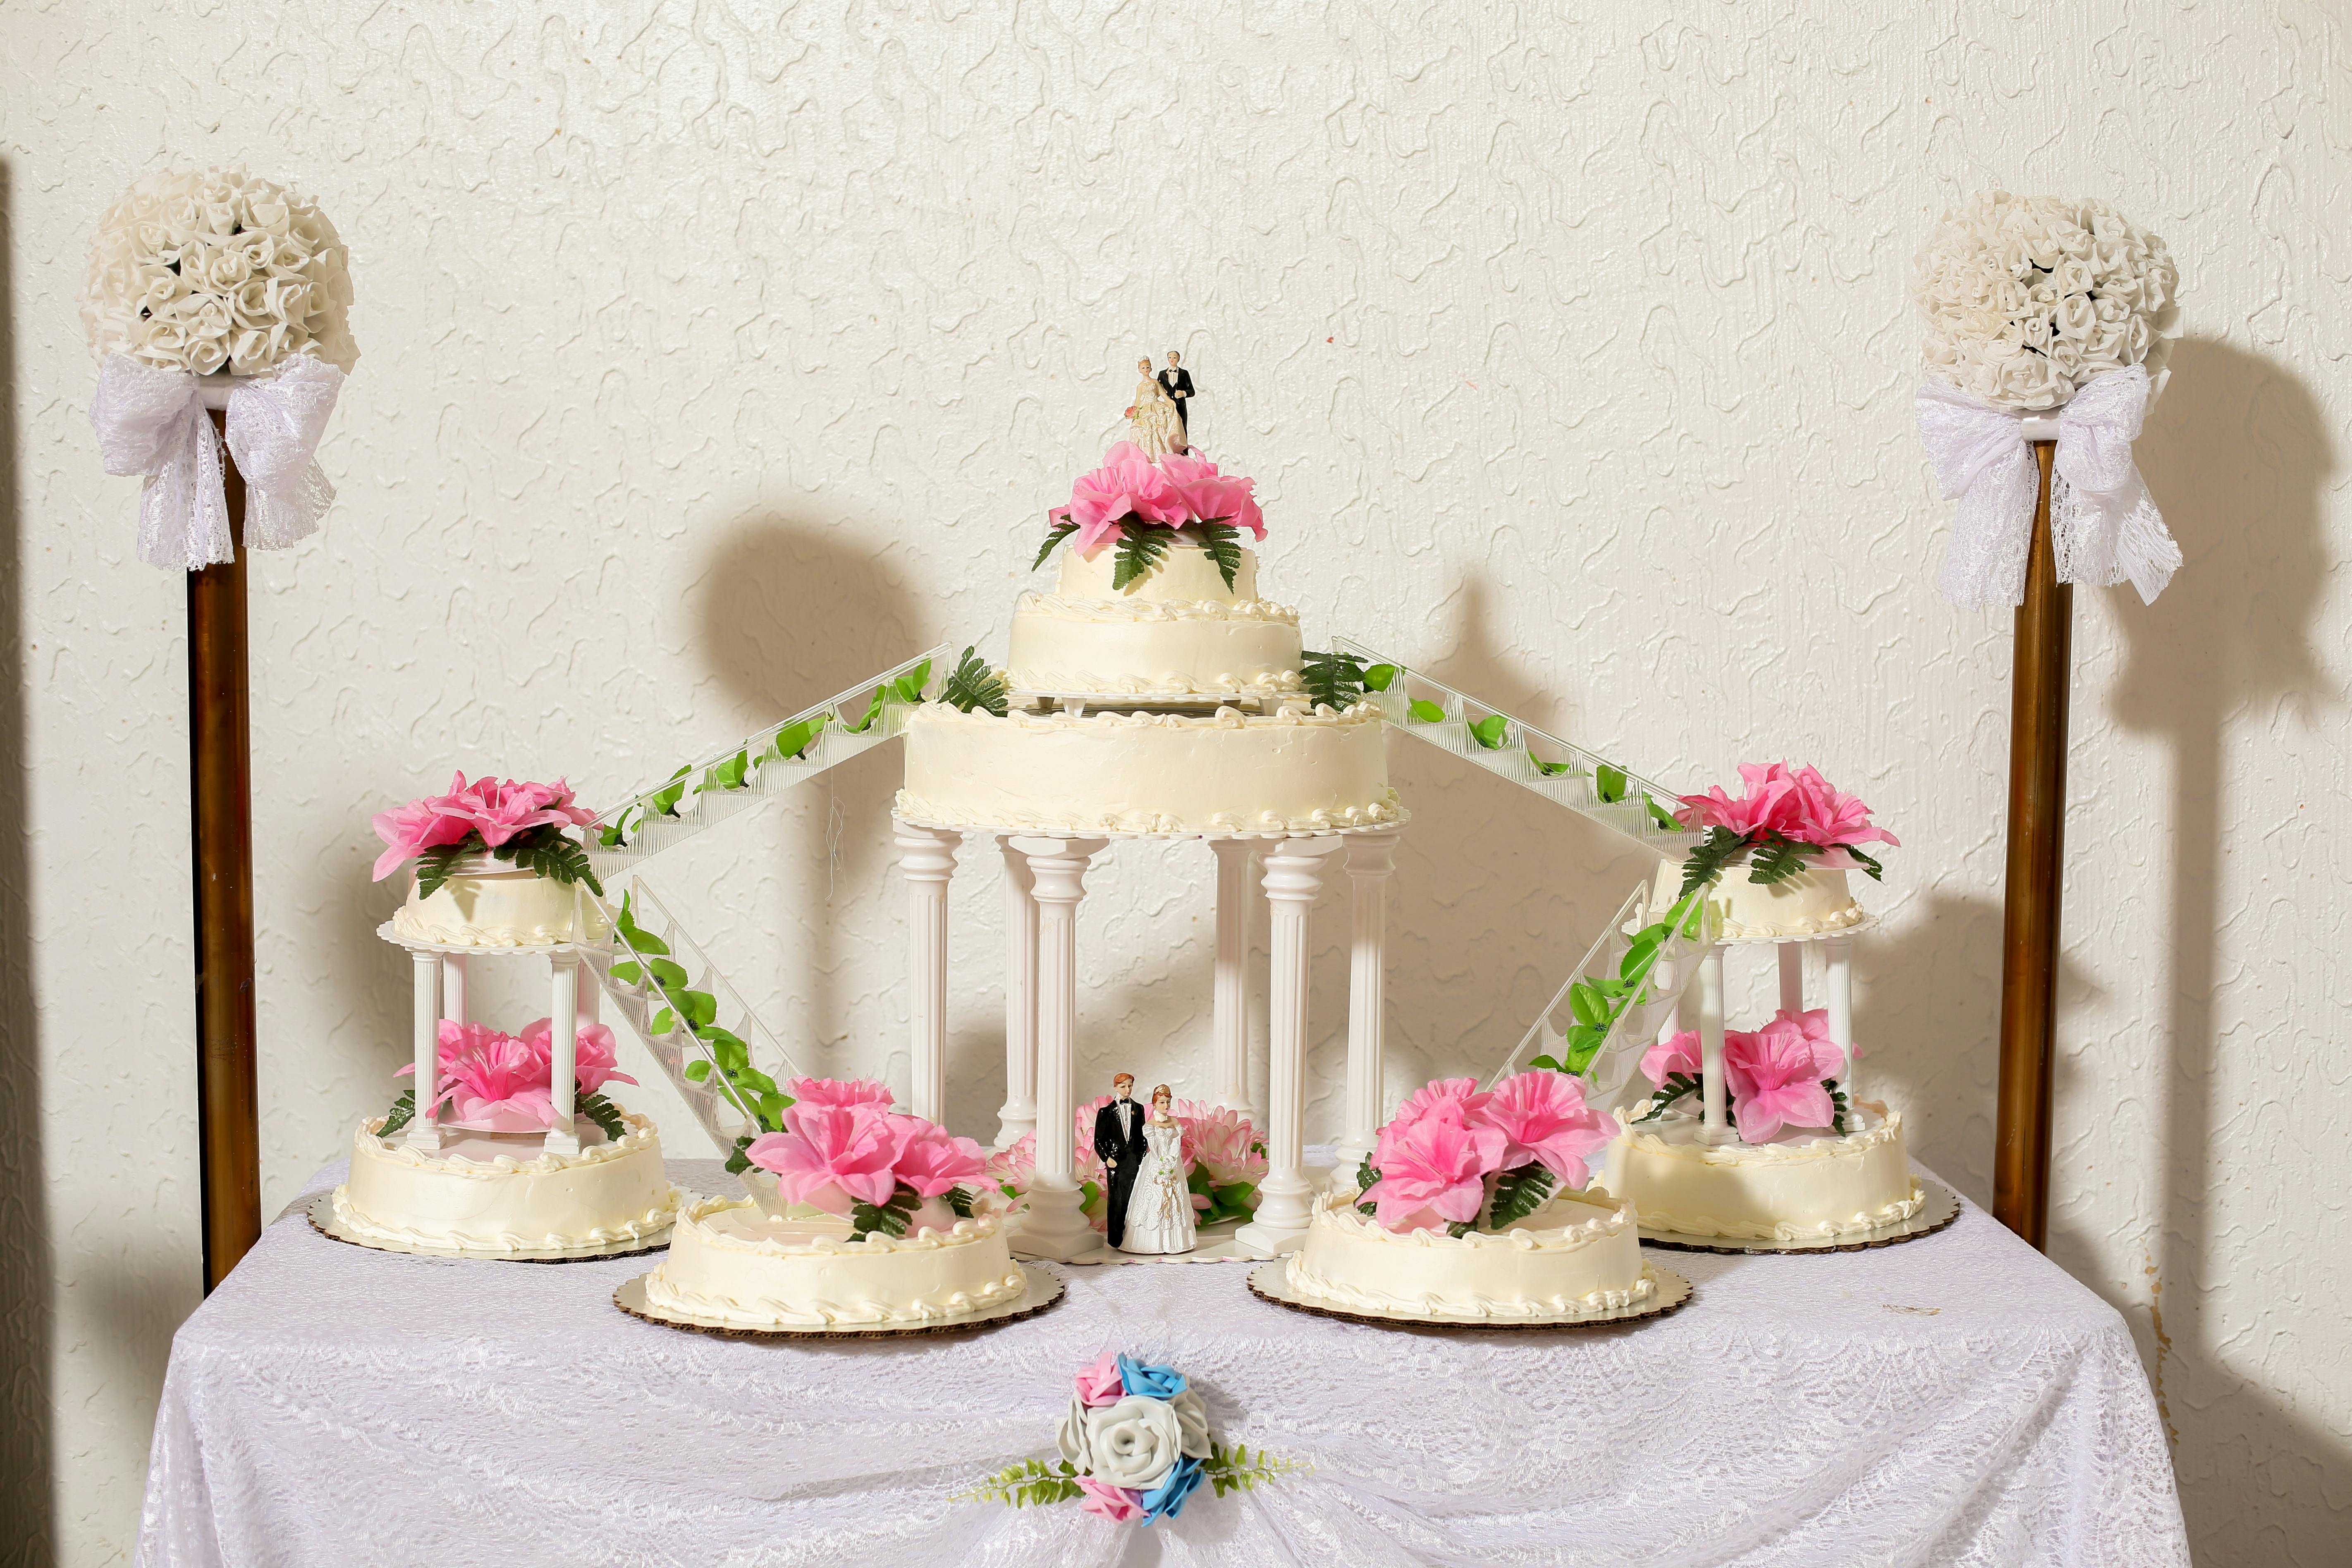 Free stock photo of Mexican wedding cake, tacky wedding cake, Wedding Cake